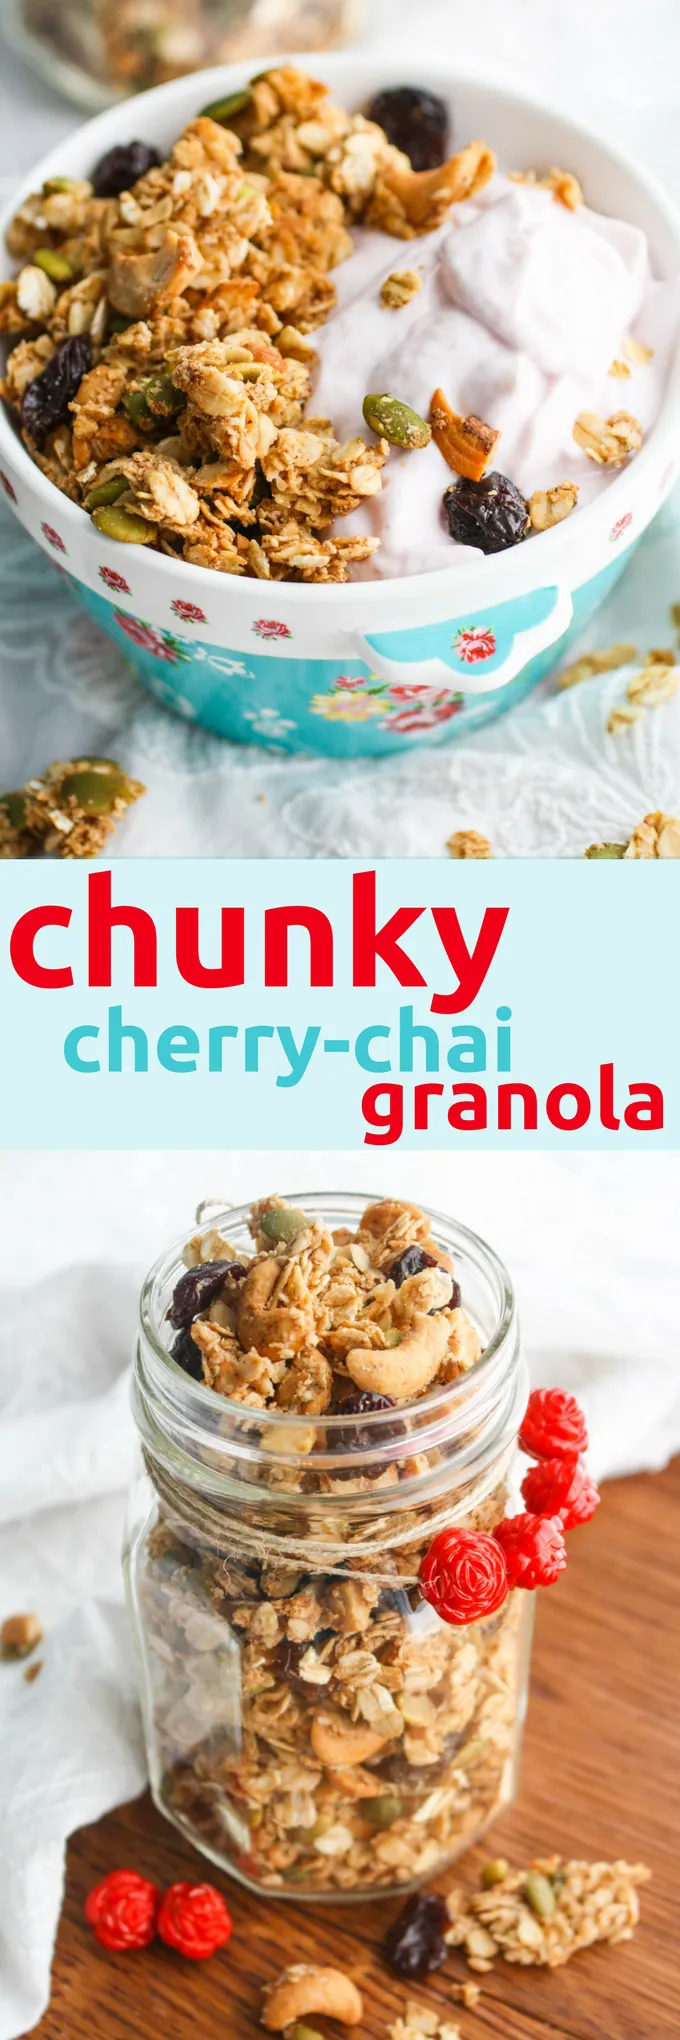 Chunky Cherry-Chai Granola is wonderful in the morning, afternoon, or evening! The ways to enjoy homemade granola are endless!